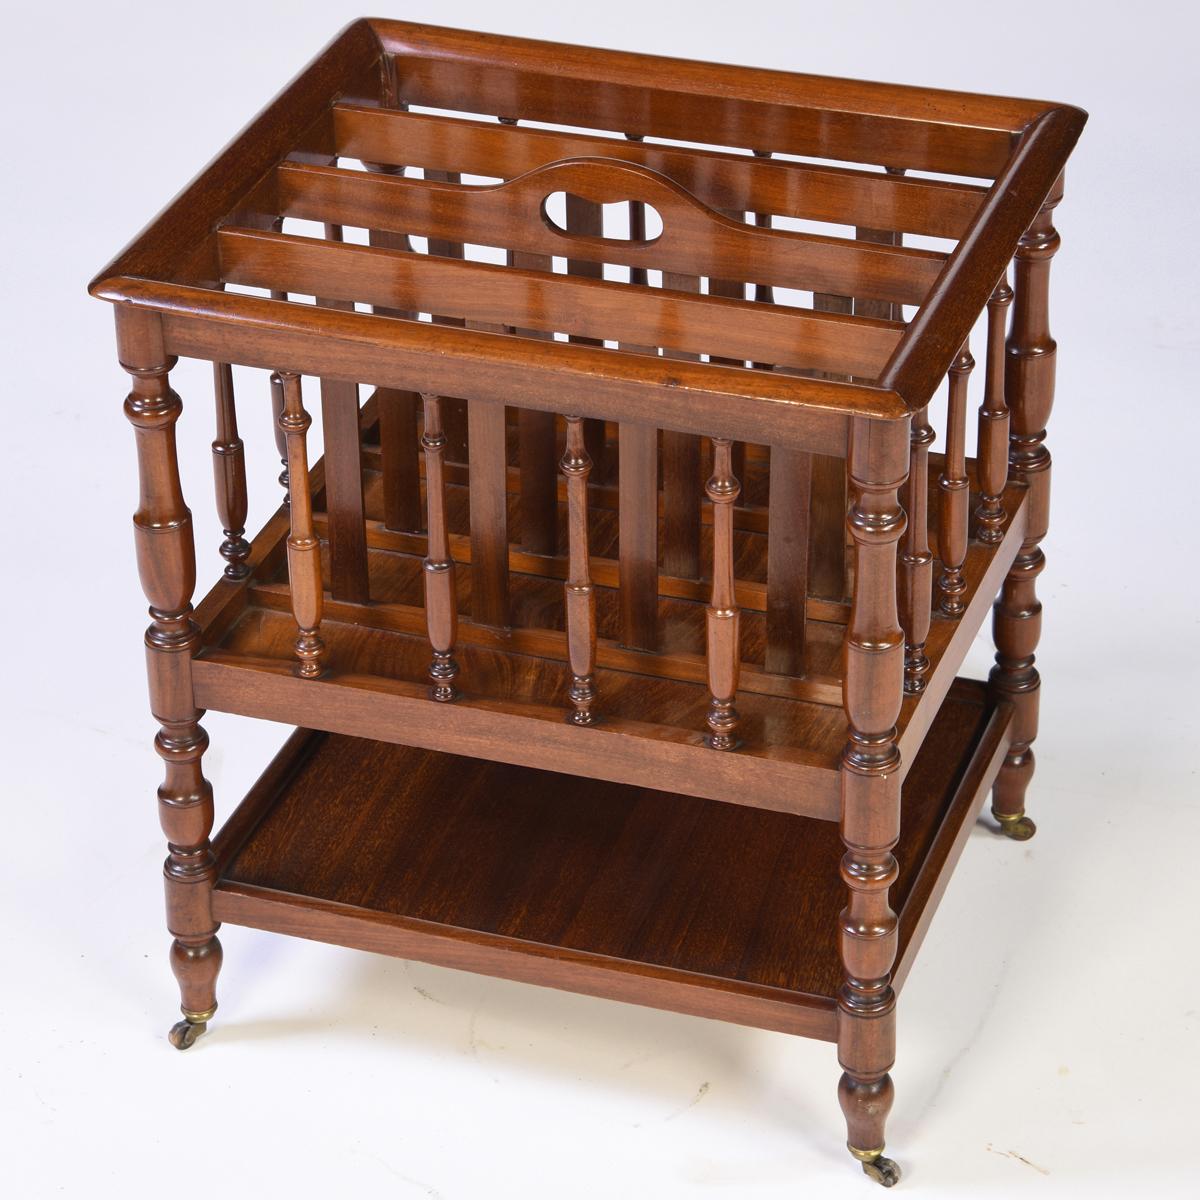 Antique English mahogany 4 division music canterbury. It has well-turned legs and outer spindles and a useful tray shelf below. In remarkably fine condition, circa 1840.